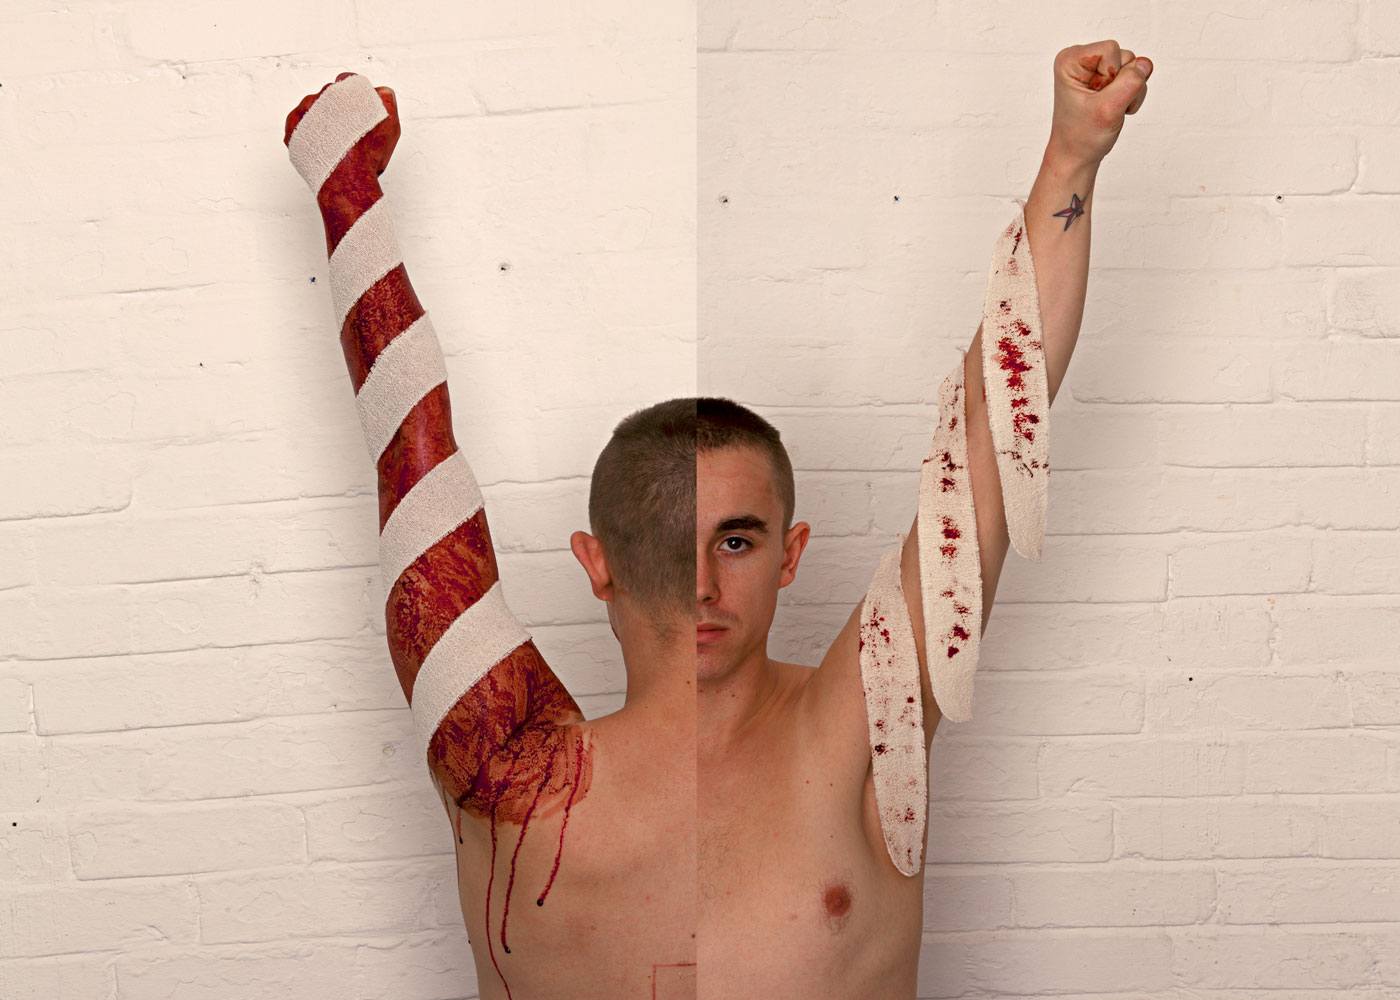 A split frame image; on the left the artist back is facing the camera with their right arm raised and their hands clutched into a fist. Their arm is covered in blood with white bandage wrapped around their arm. On the right the artist is facing the camera with the same arm raised where the arm is not covered in blood, but the bandage wrapped around their arm is.